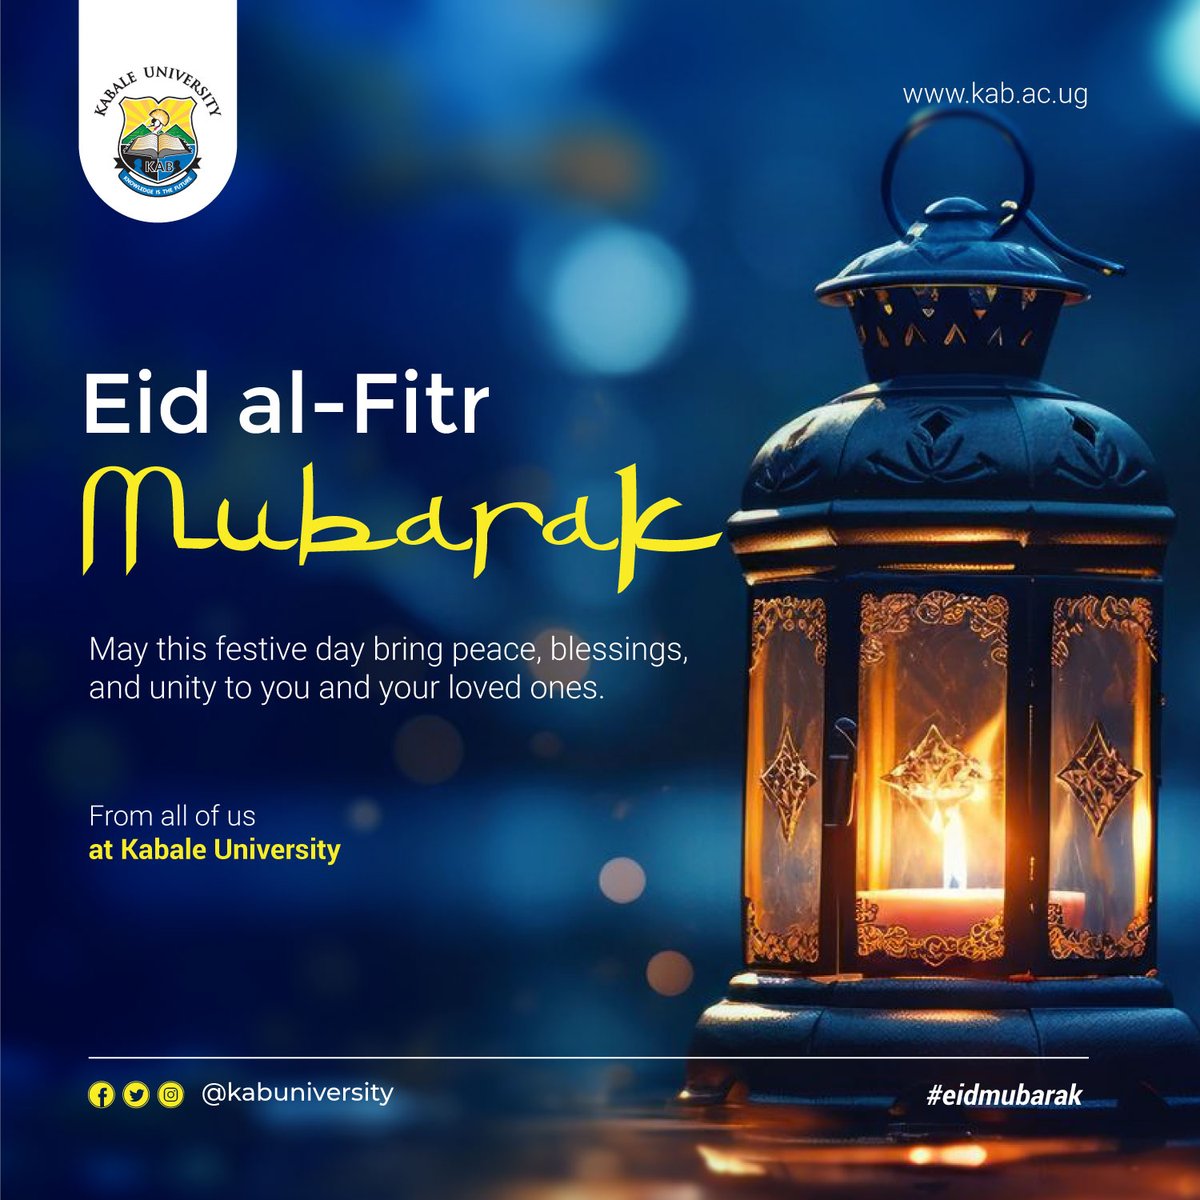 To the Muslim community, we celebrate with you. Happy Eid.